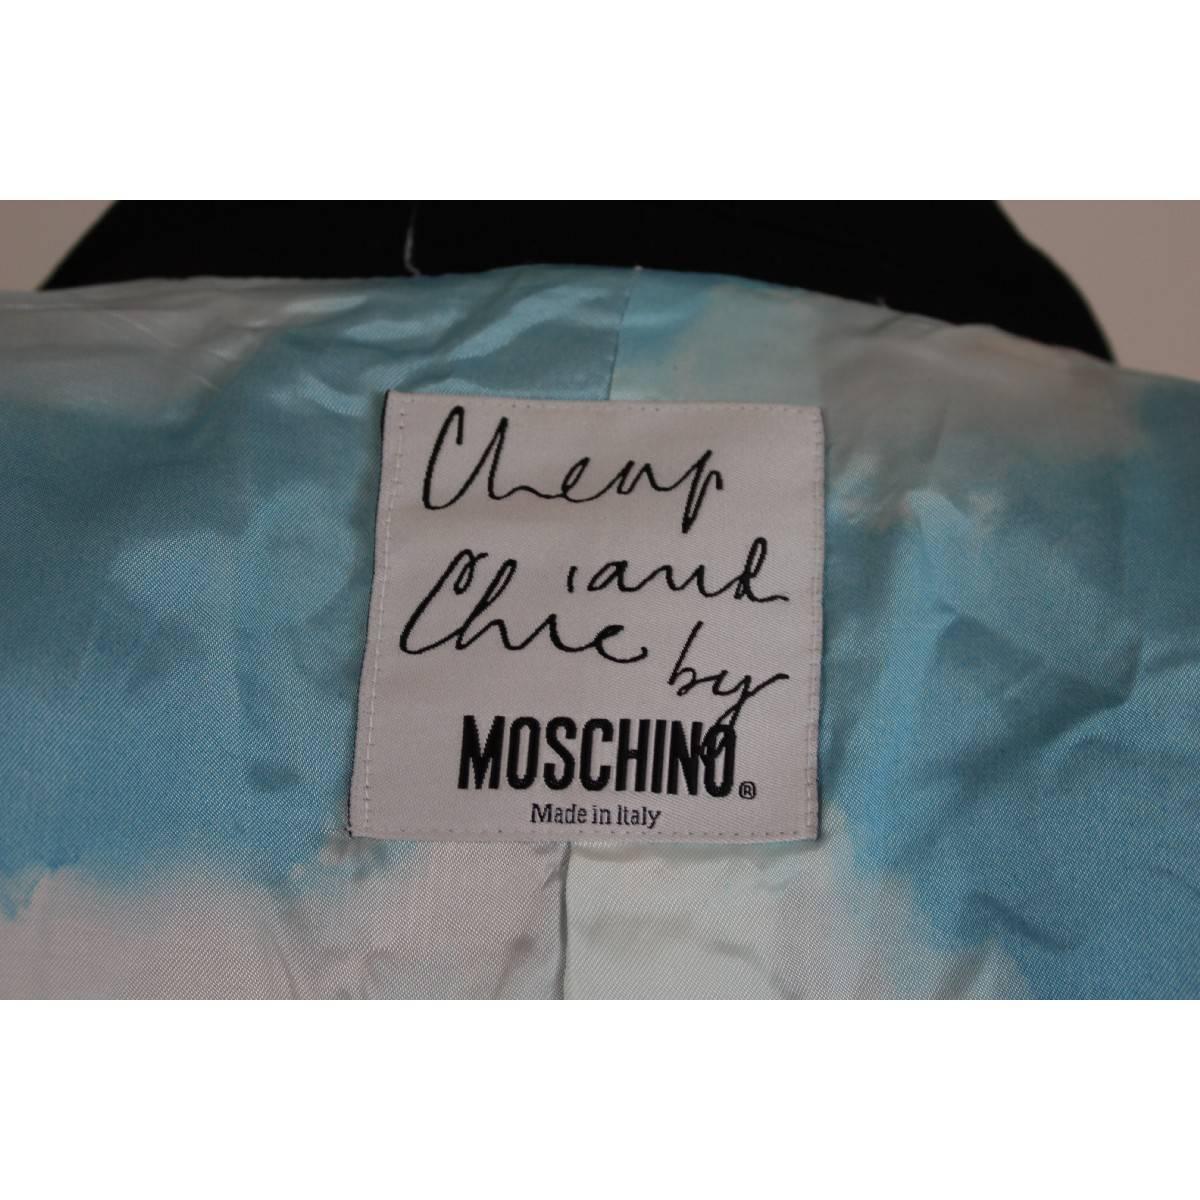 Moschino Cheap and Chic vintage 1990s black jacket women size 44 slim fit For Sale 1